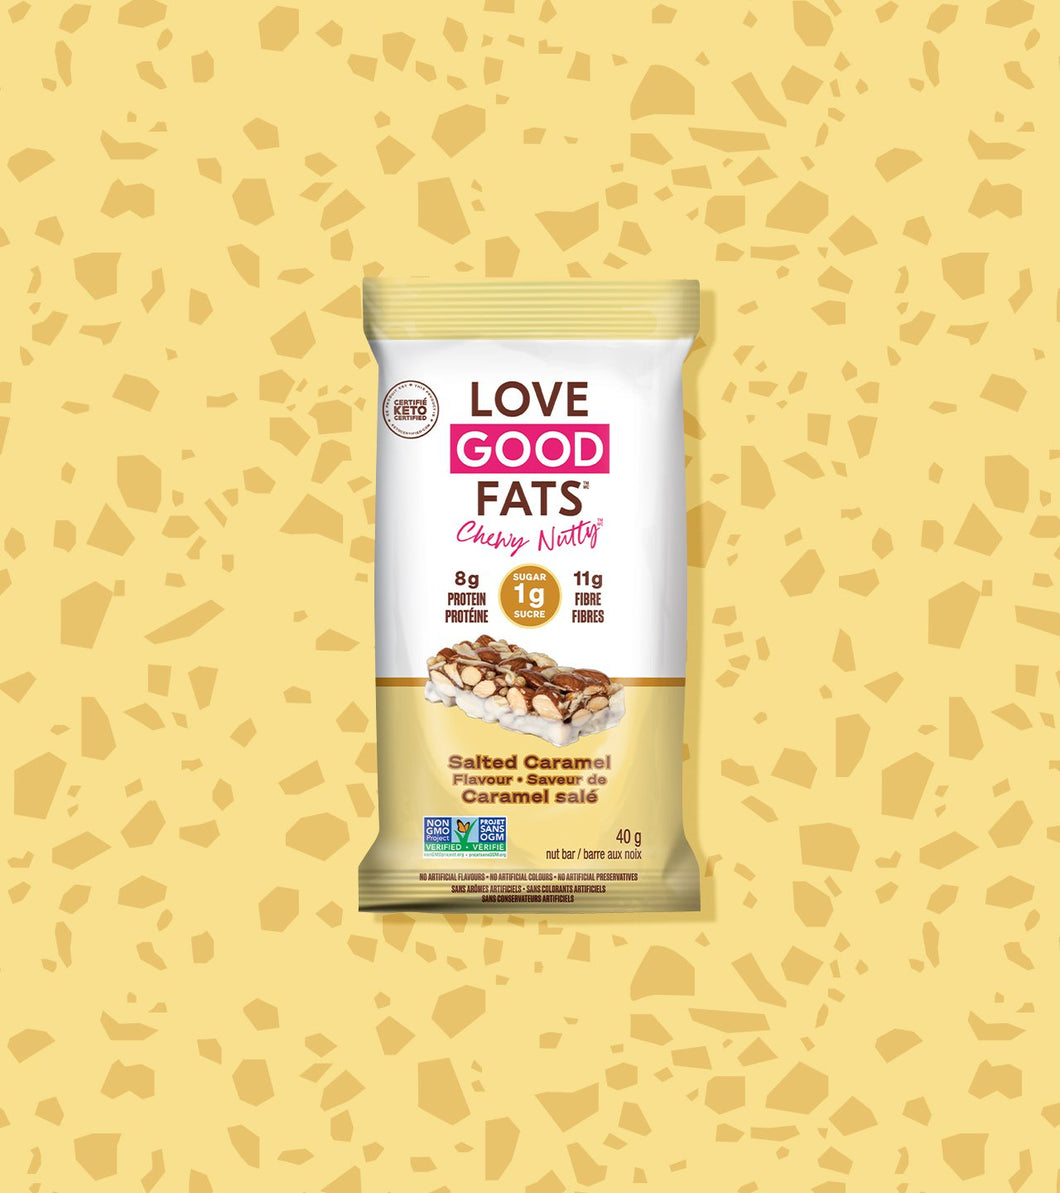 Love Good Fats- Salted Caramel Chewy Nutty Bar 40g